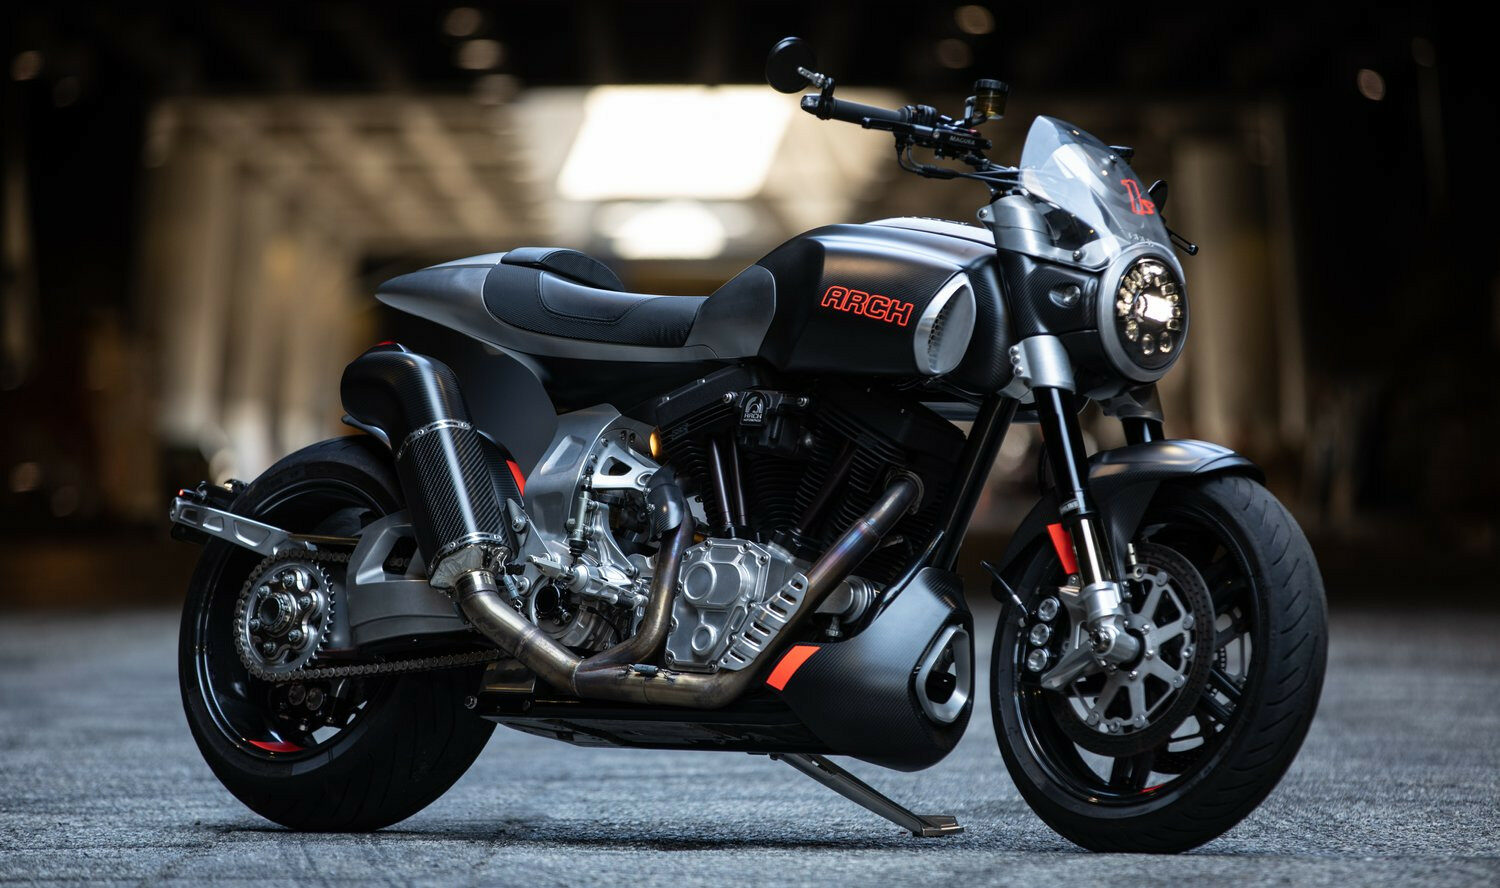 Arch Motorcycle's new 1s 